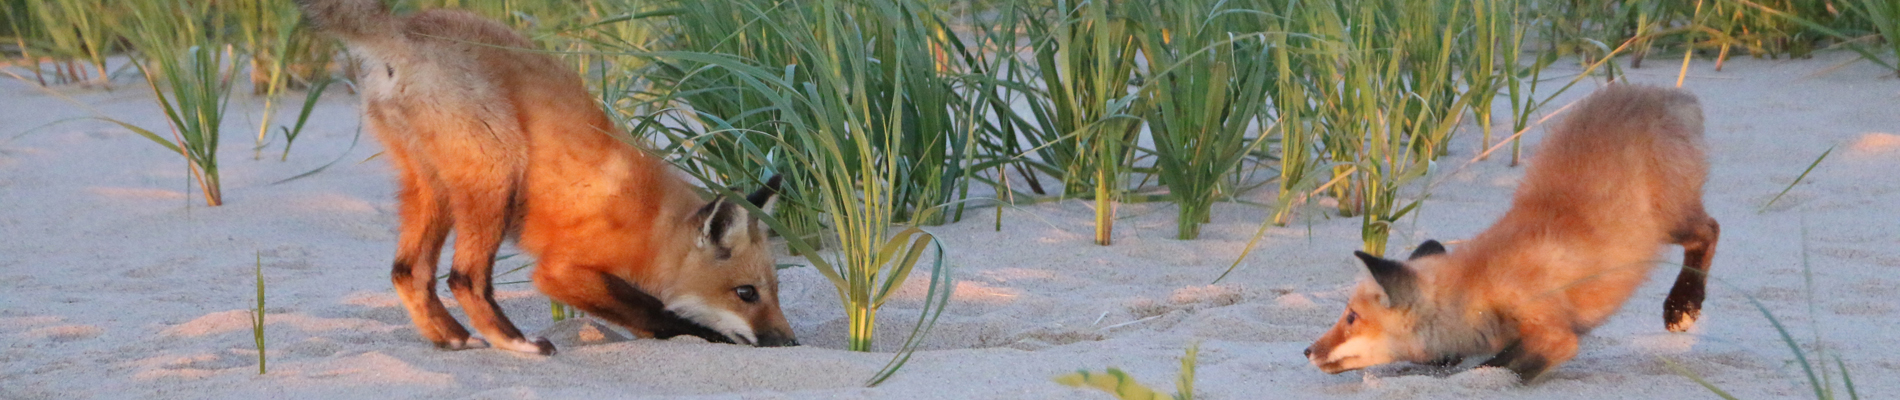 Foxes playing on the beach 